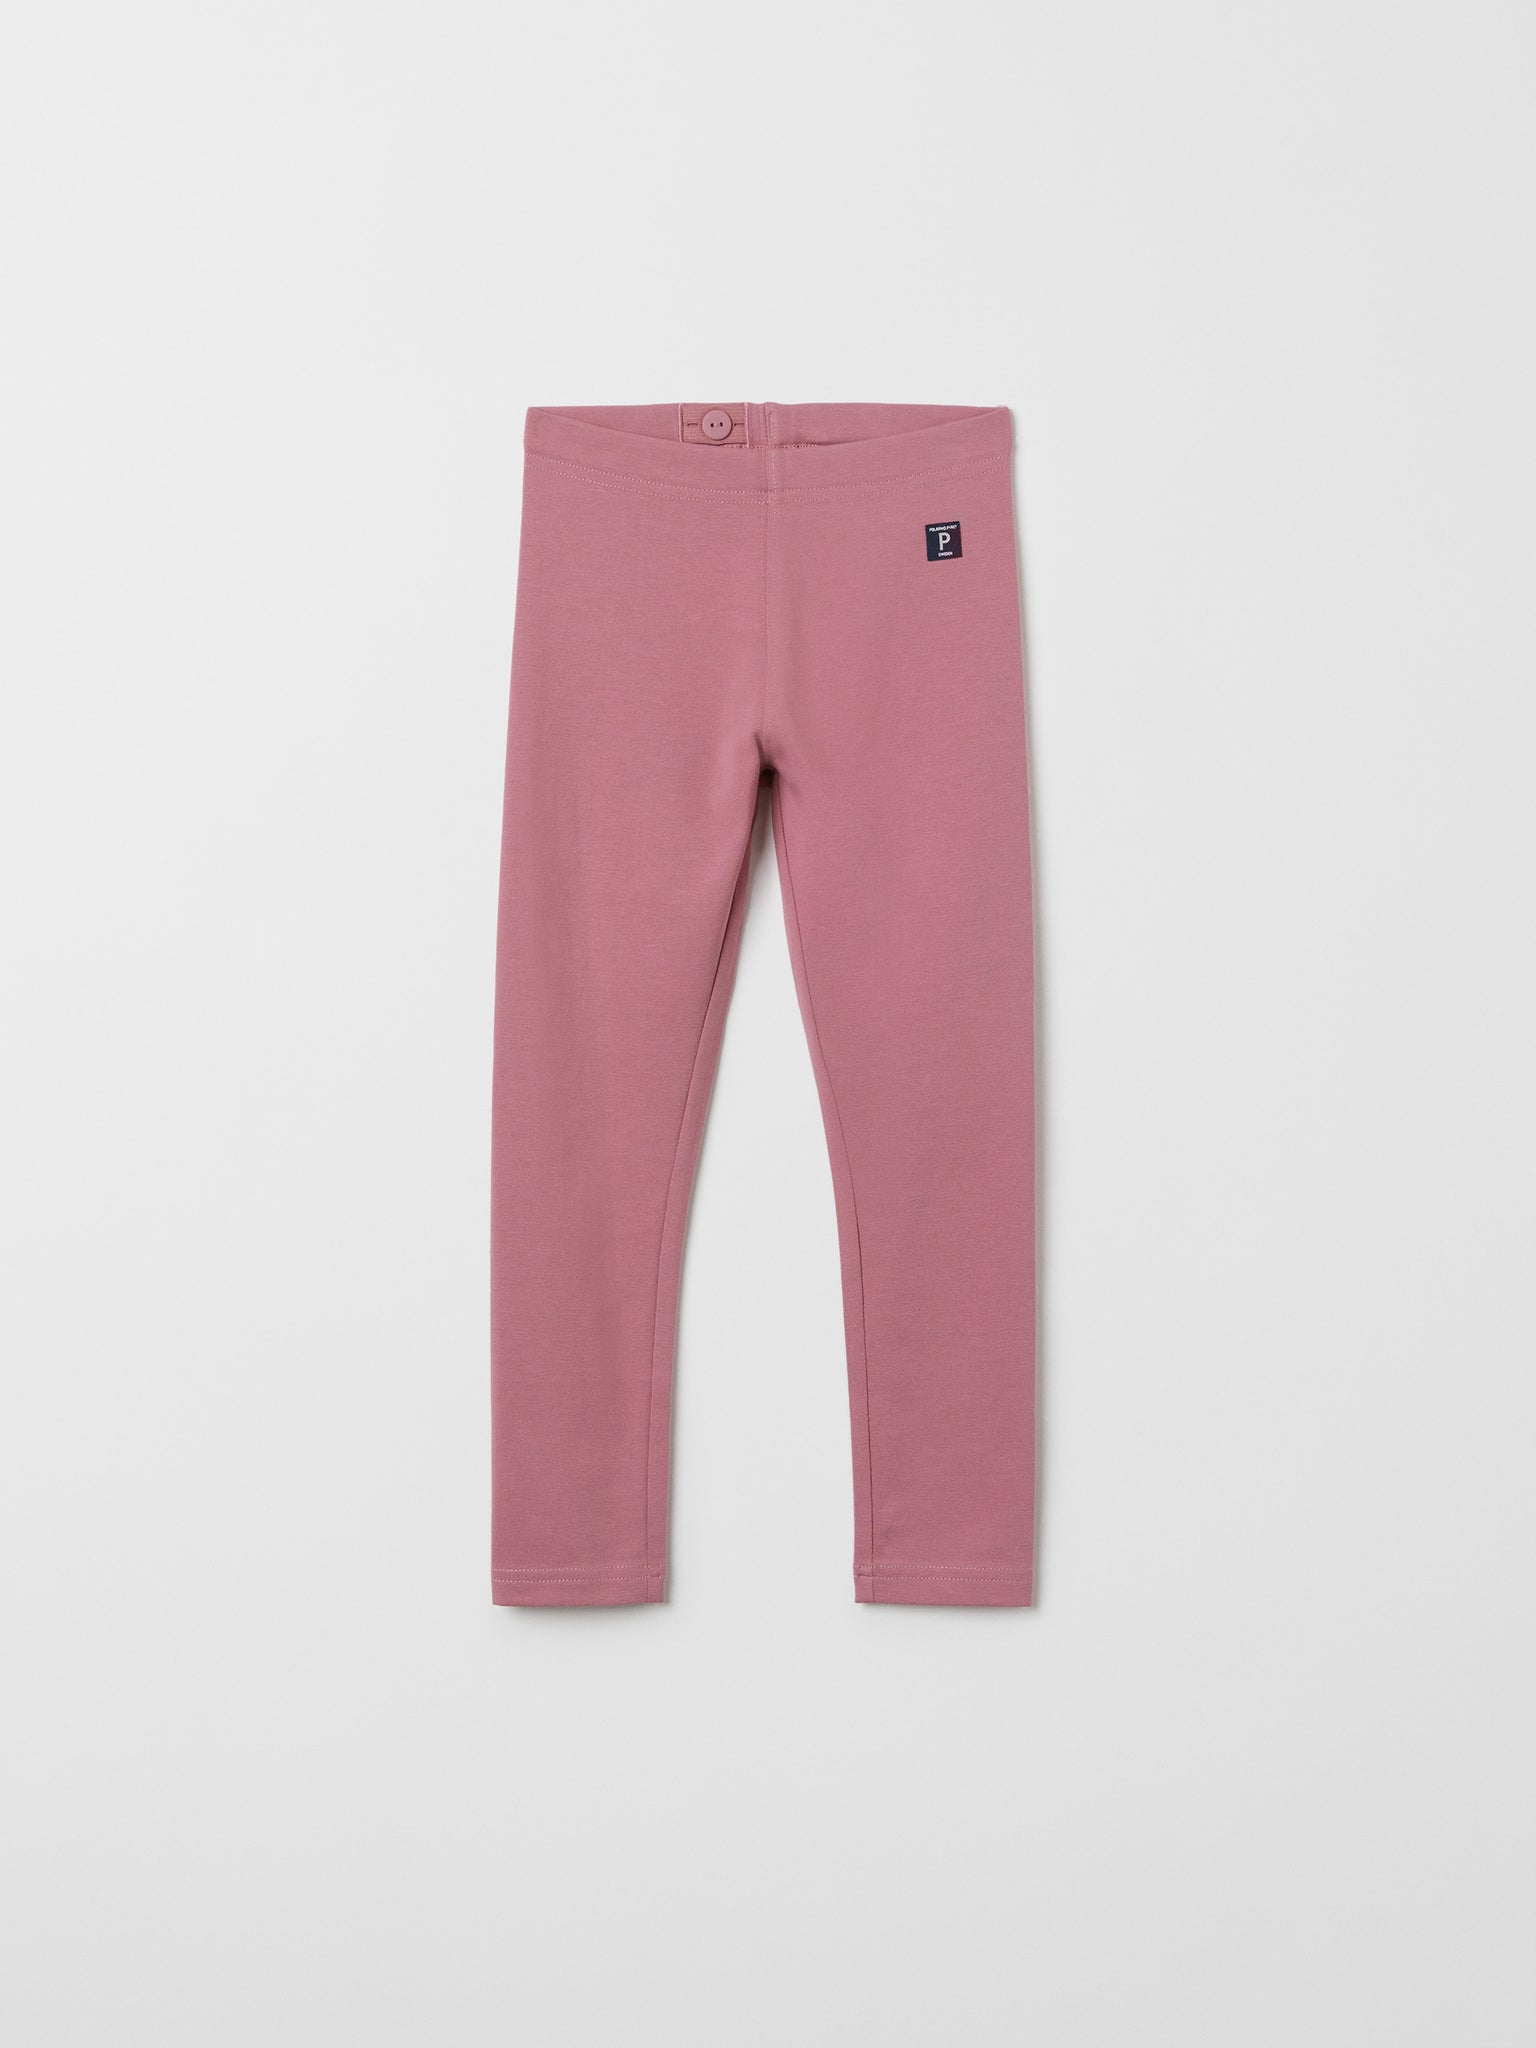 Organic Cotton Pink Kids Leggings from the Polarn O. Pyret kidswear collection. Ethically produced kids clothing.